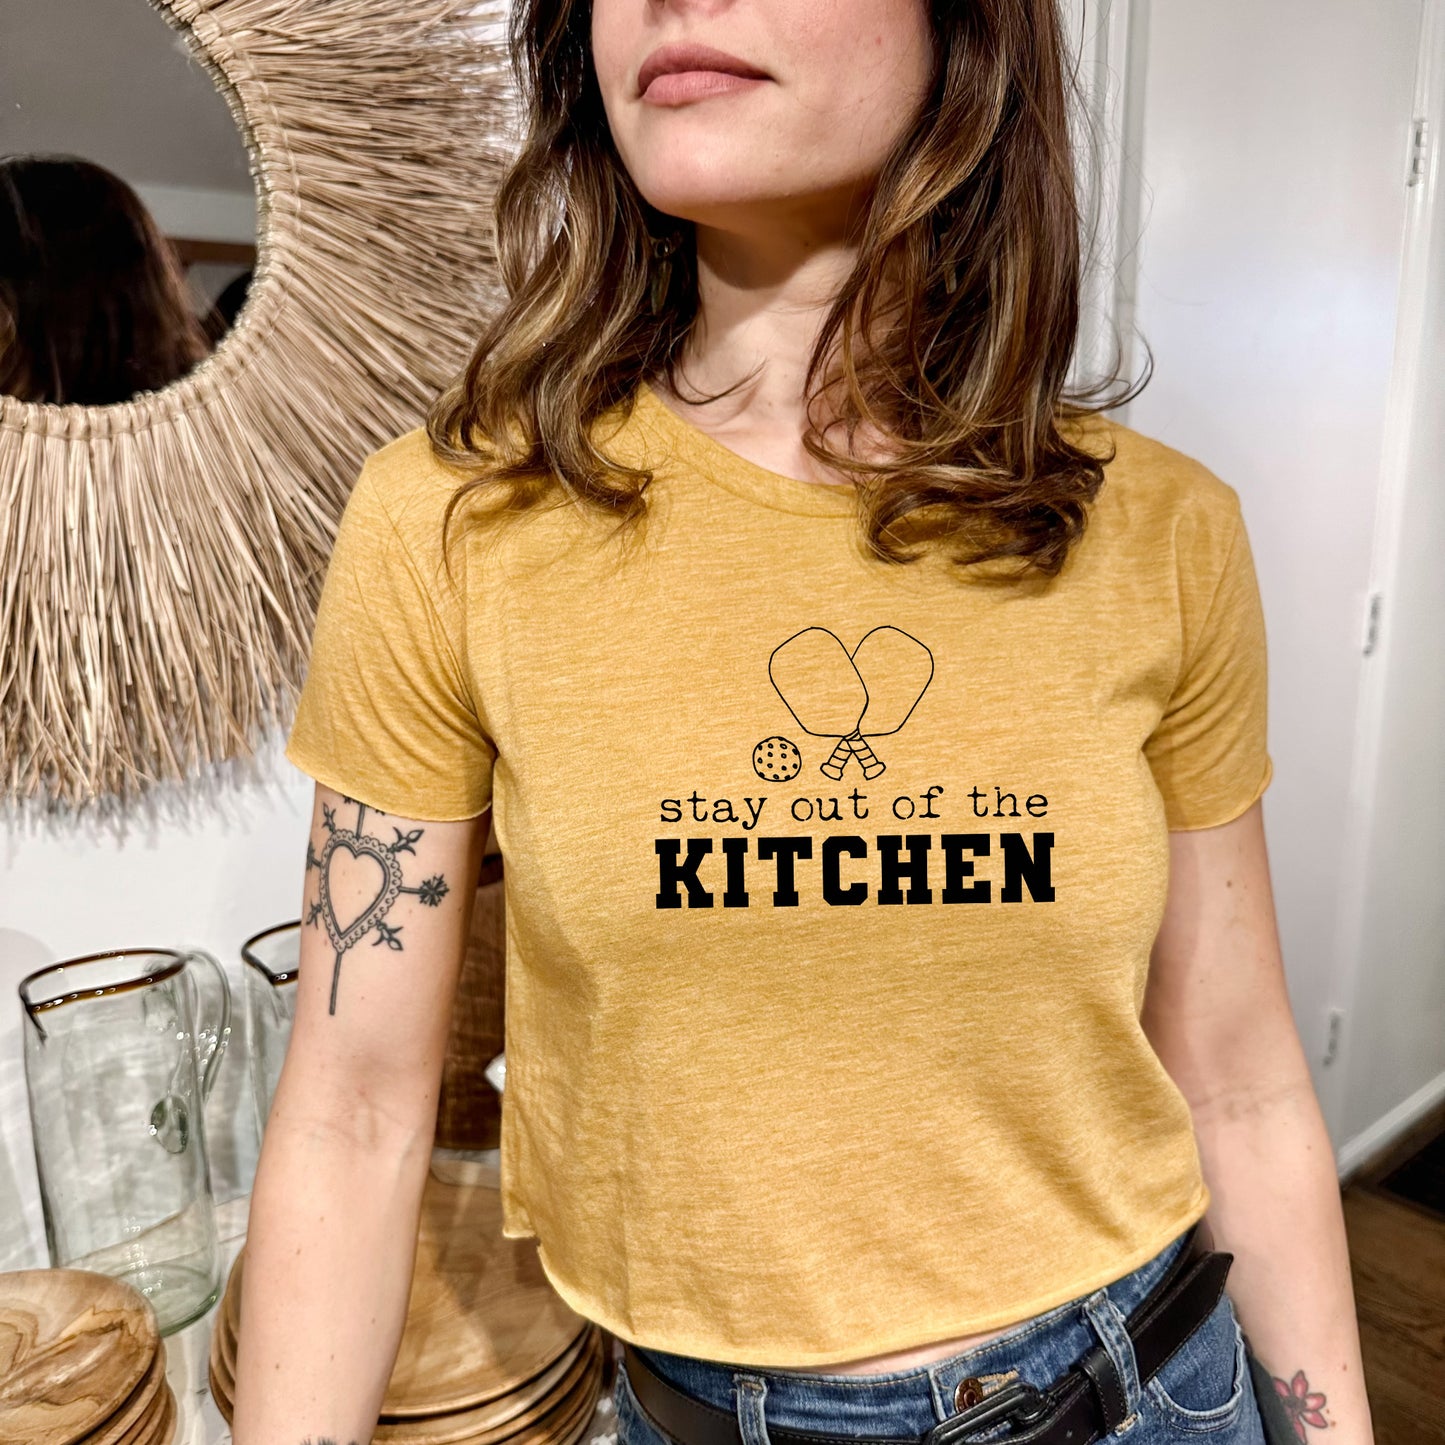 a woman wearing a yellow shirt that says stay out of the kitchen